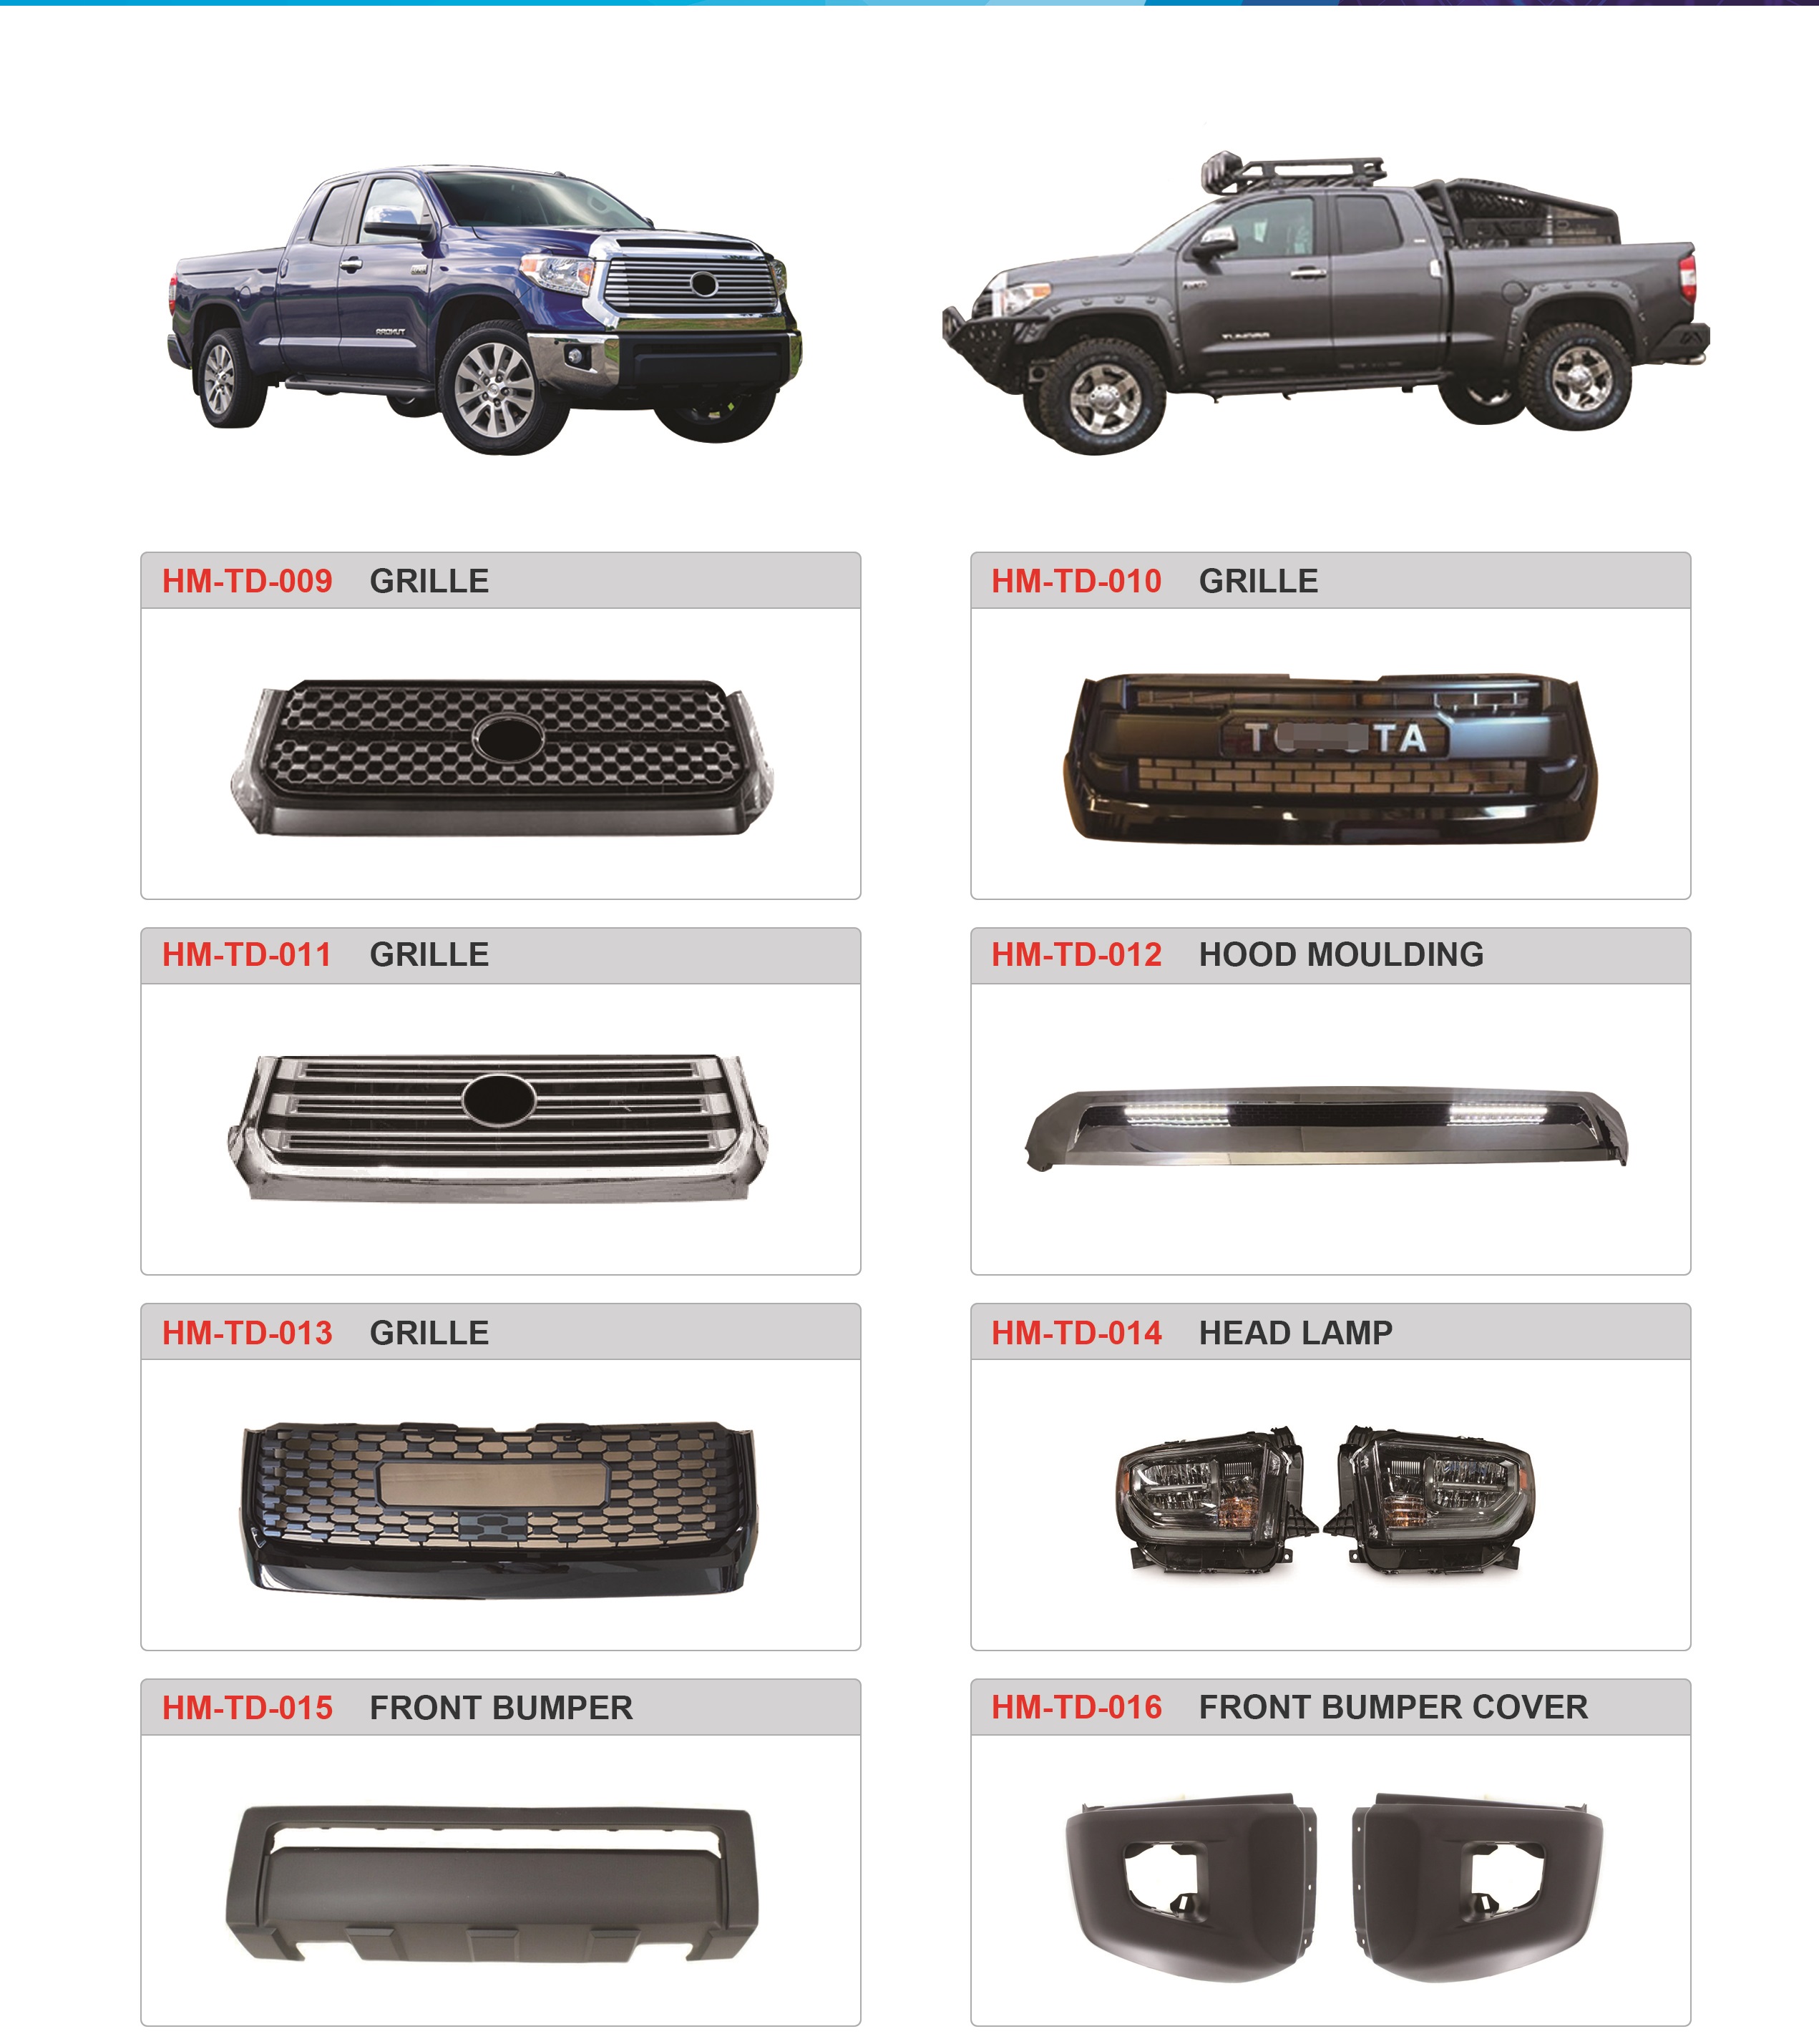 FOR TUNDRA GRILLE Featured Image